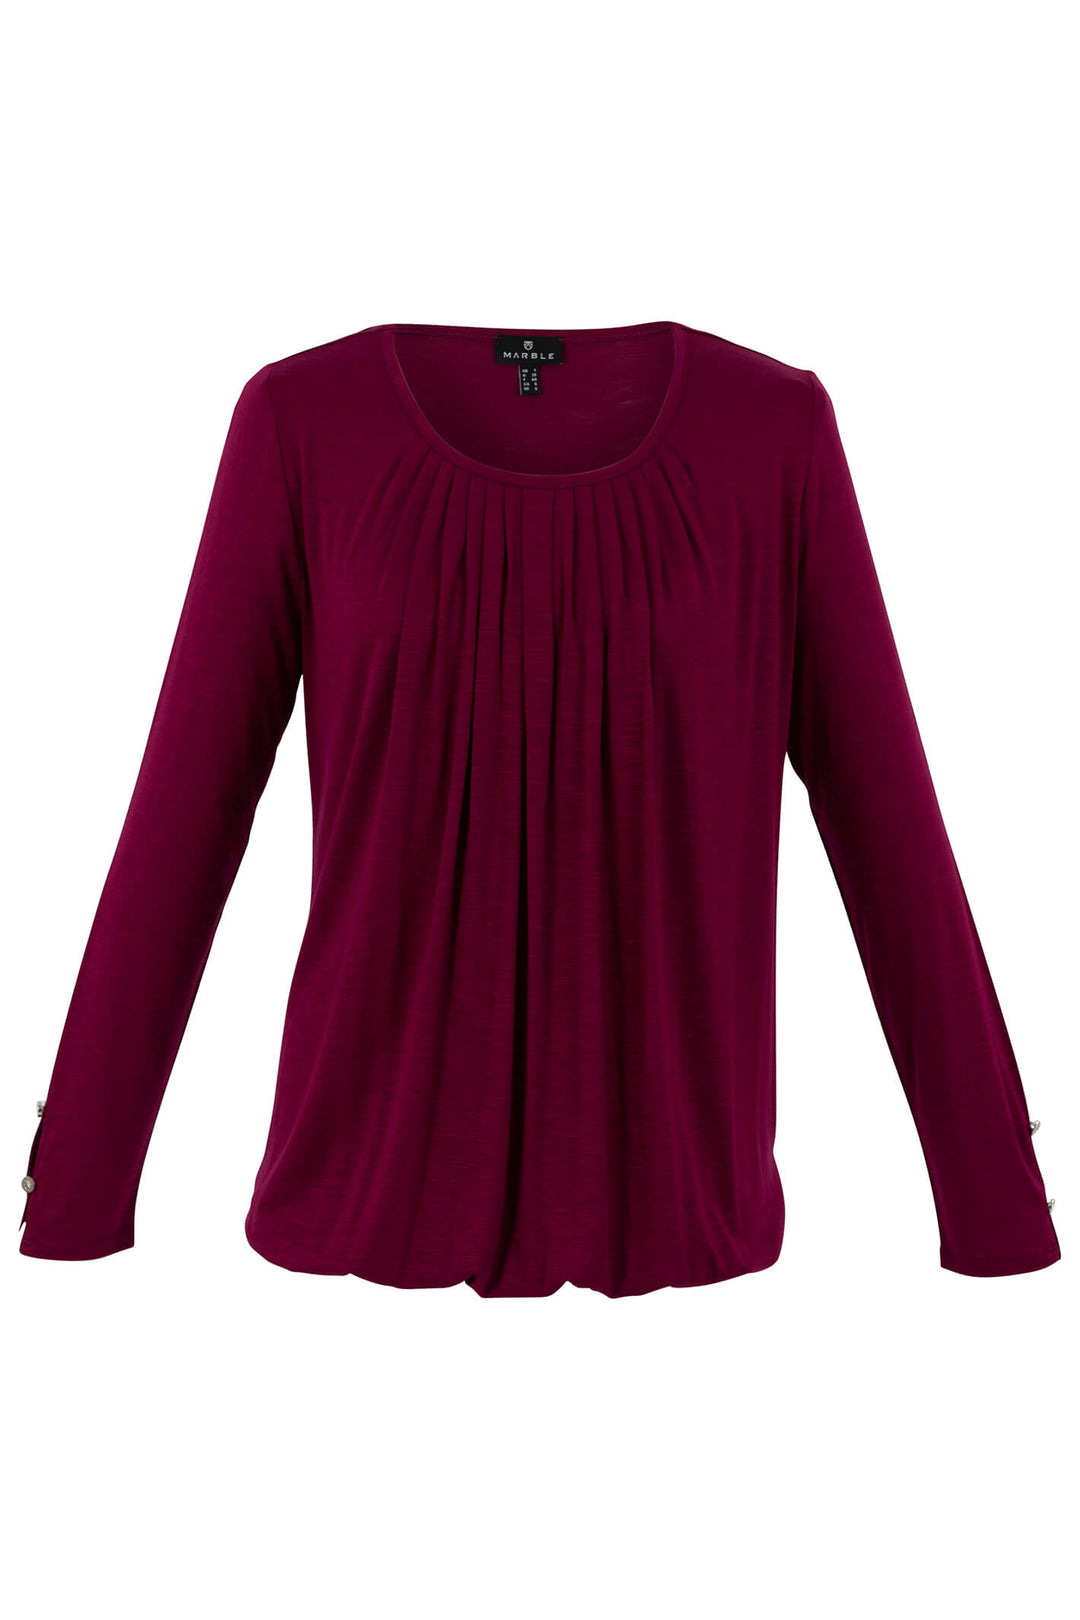 Marble Fashion 7093 205 Burgundy Red Gathered Front Long Sleeve Top - Experience Boutique